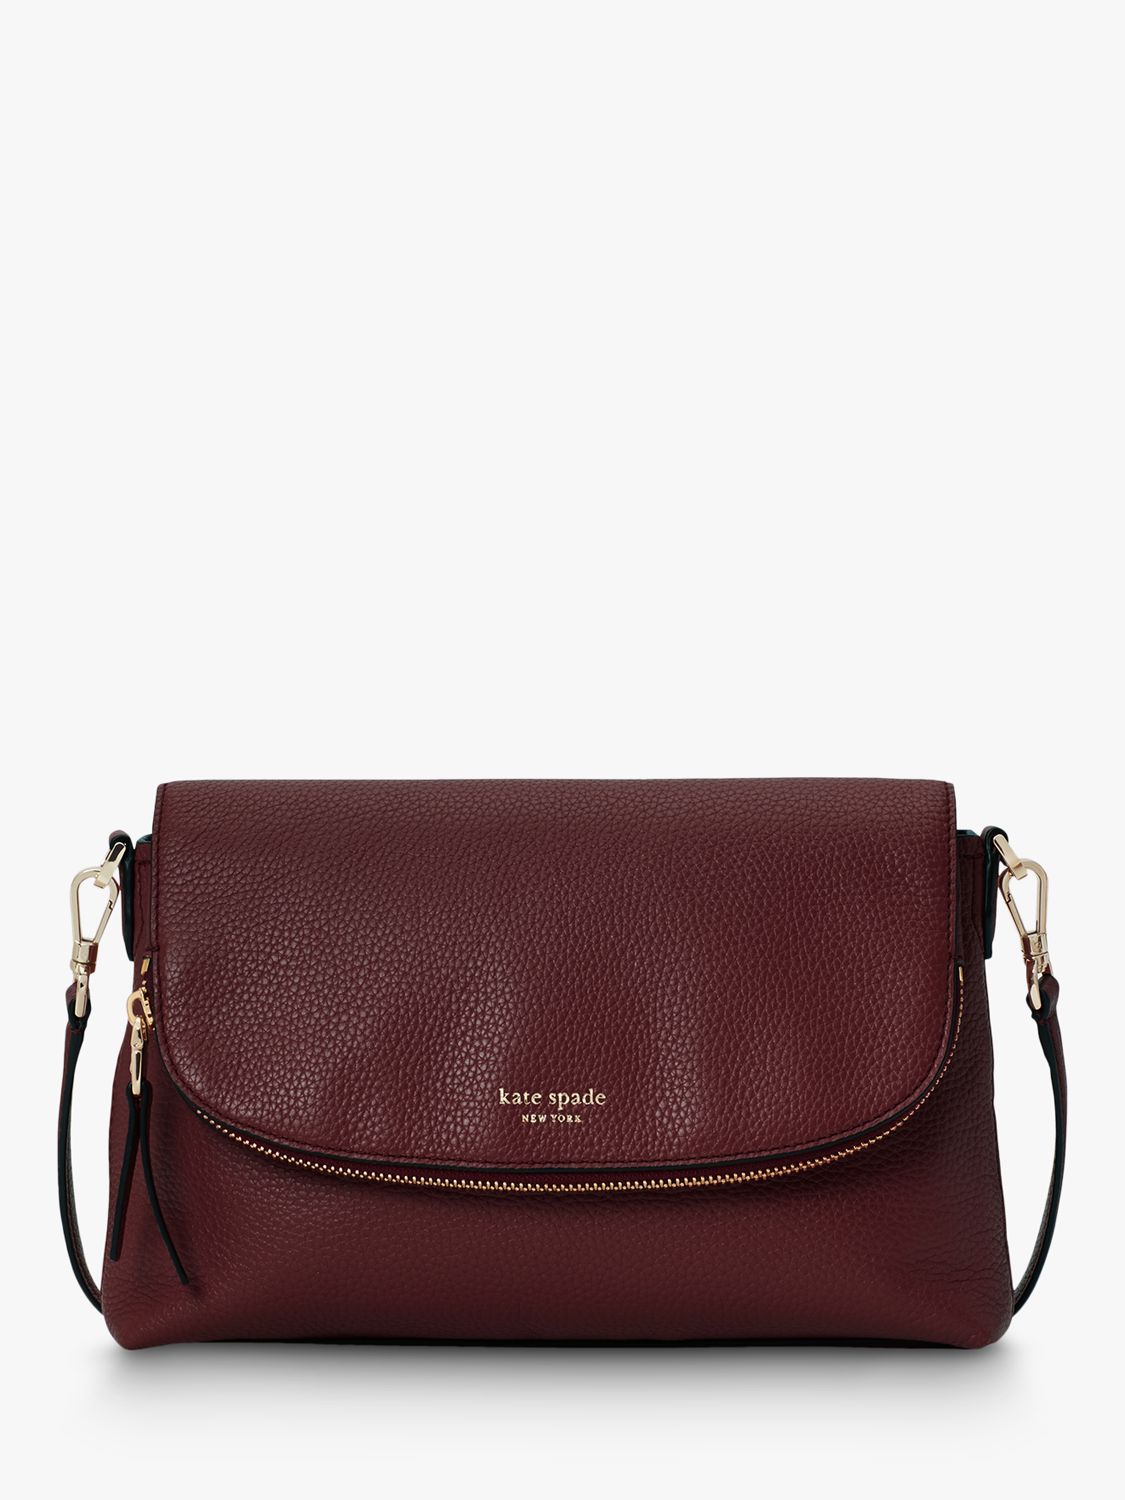 kate spade new york Polly Leather Large Flap Over Cross Body Bag at John Lewis & Partners